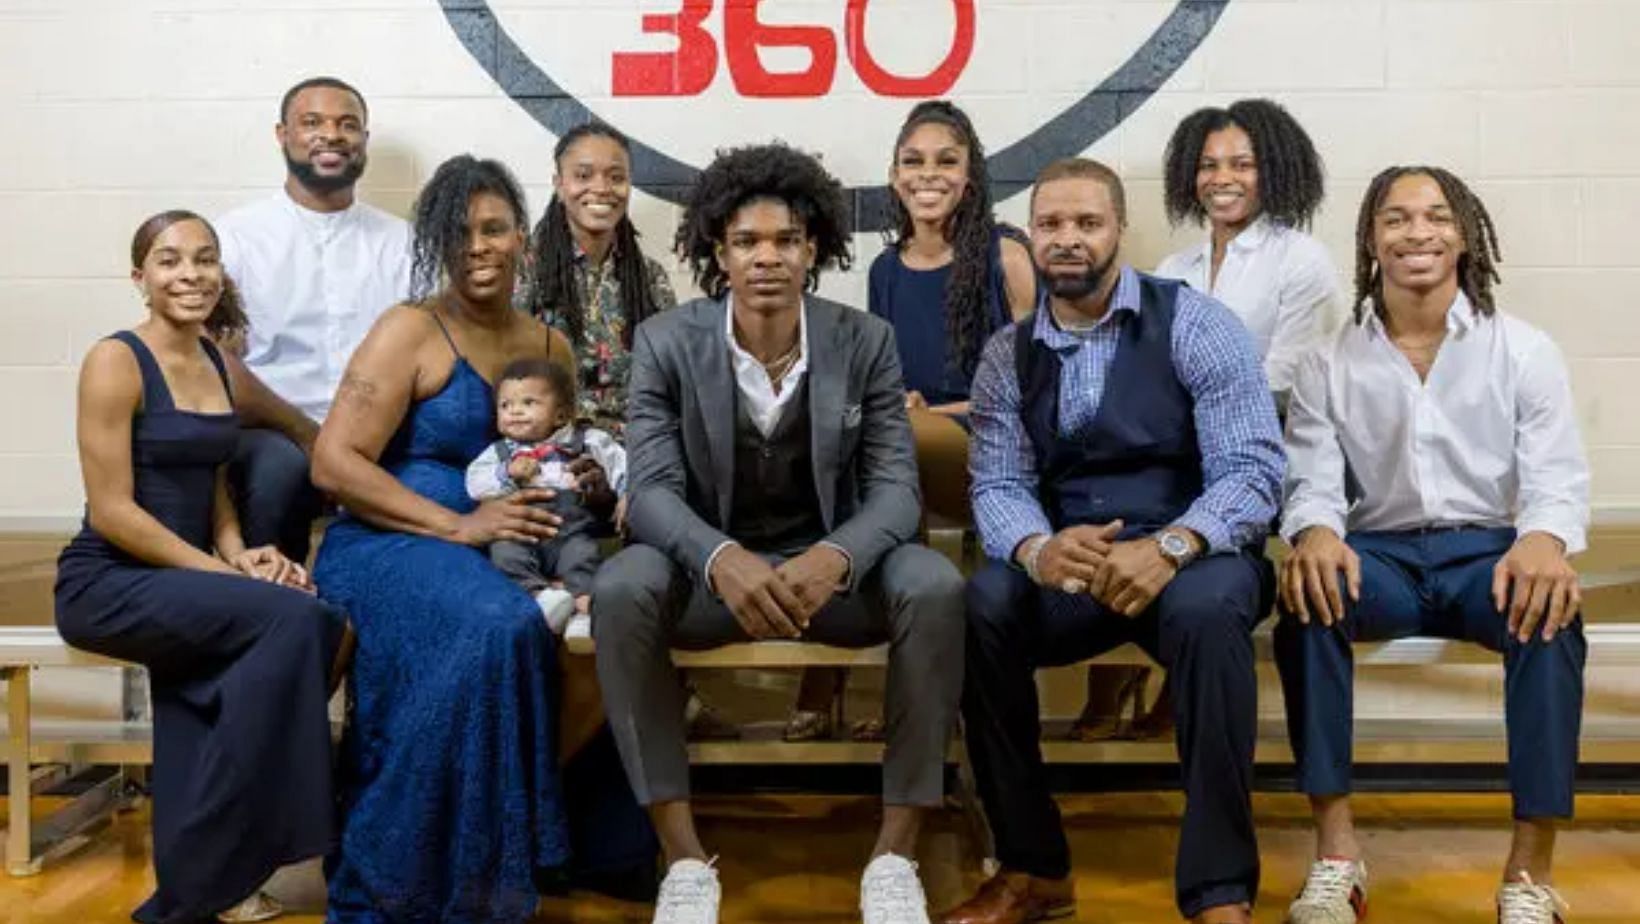 Scoot Henderson, the No. 3 pick of the 2023 NBA Draft, has six siblings.